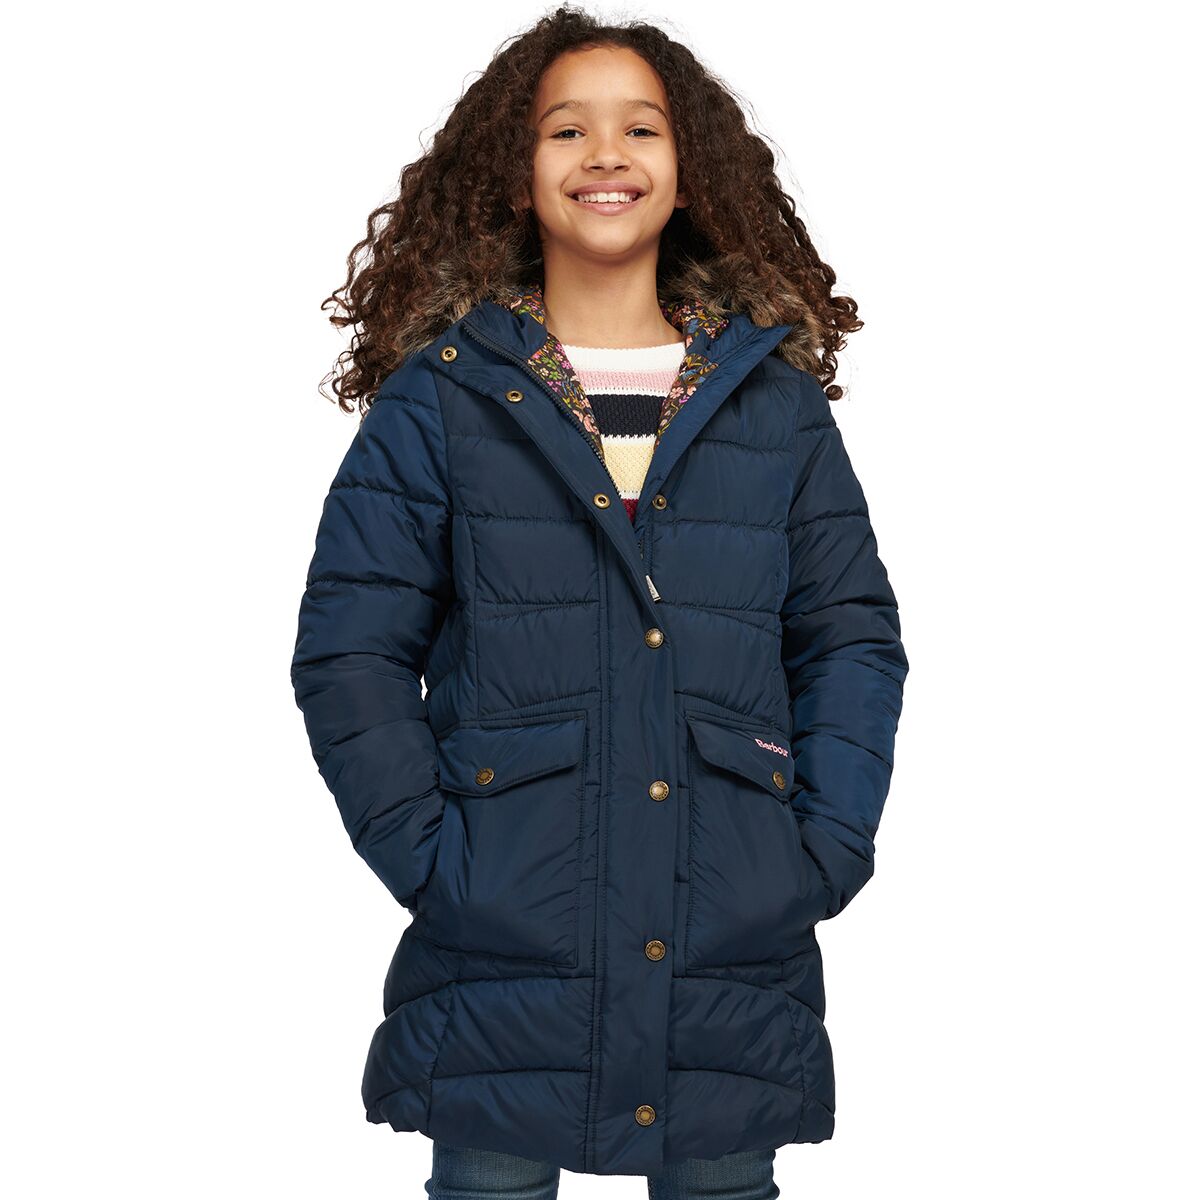 Beresford Quilted Jacket - Girls' by Barbour | US-Parks.com